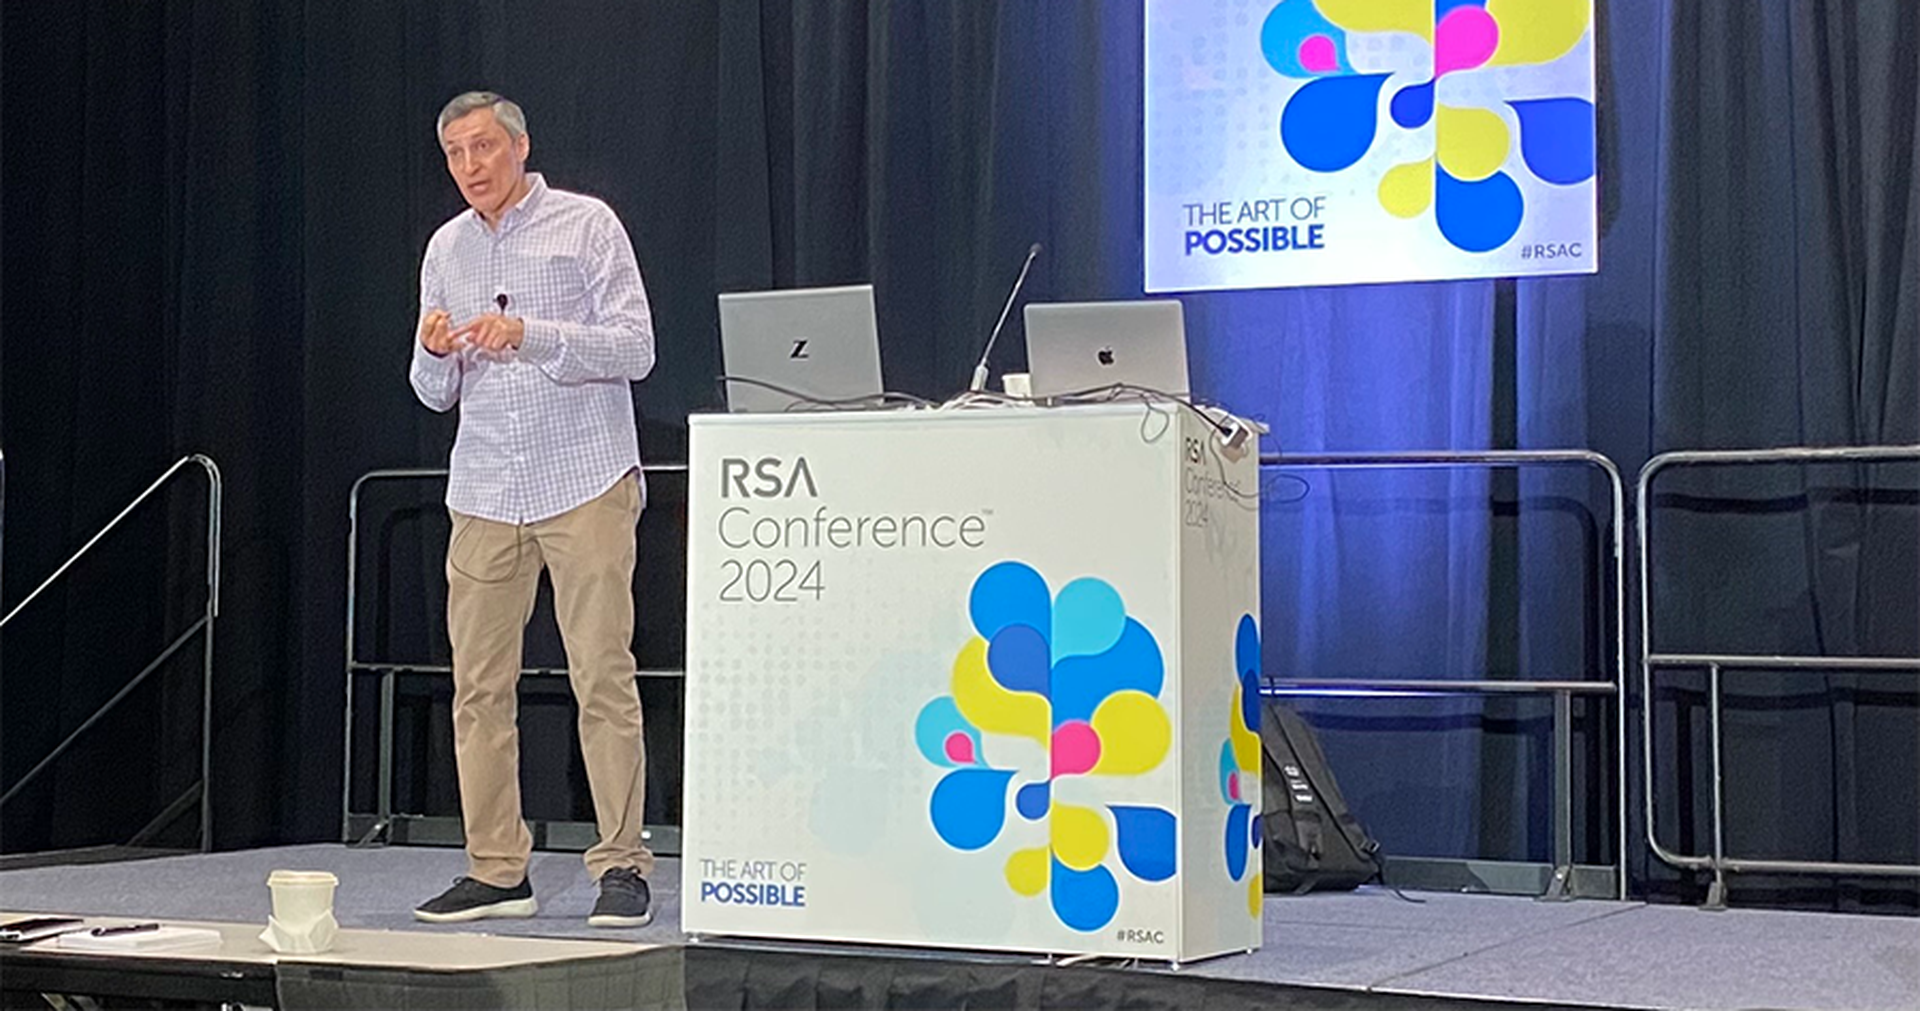 Behnam Dayanim speaks Monday during a presentation on artificial intelligence and the law at the RSA Conference in San Francisco. (Laura French / SC Media)